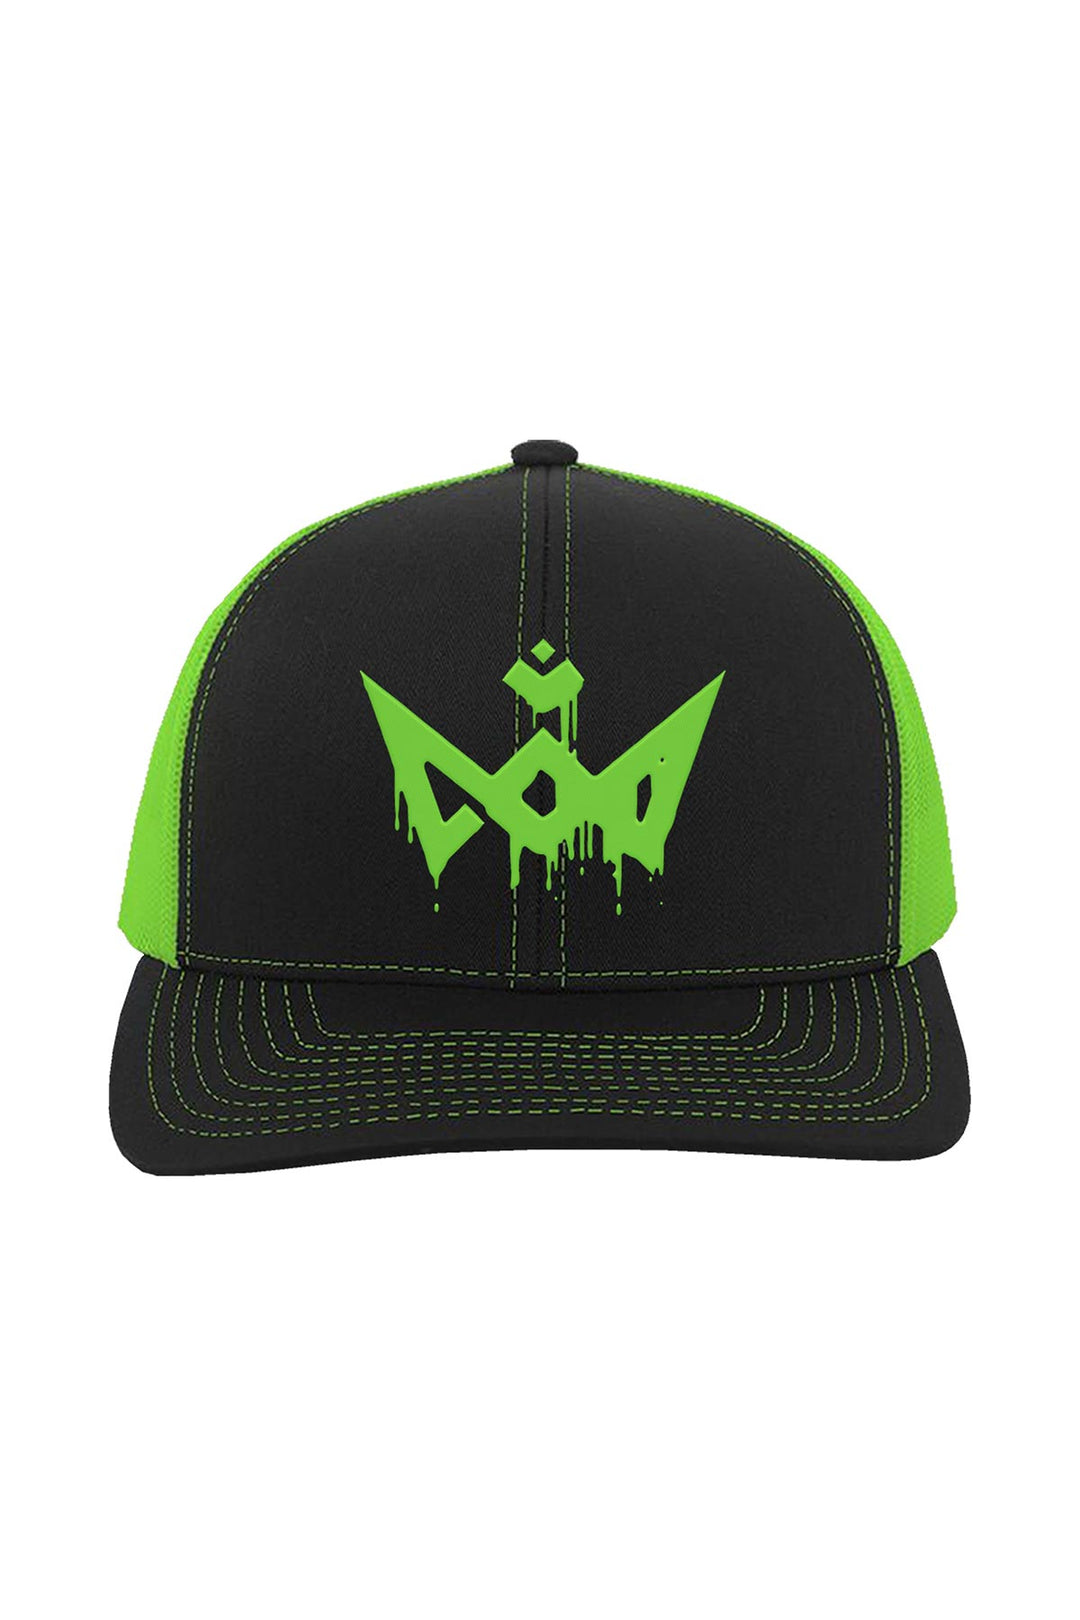 Trucker Snapback Cap - Drippy Crown Embroidery